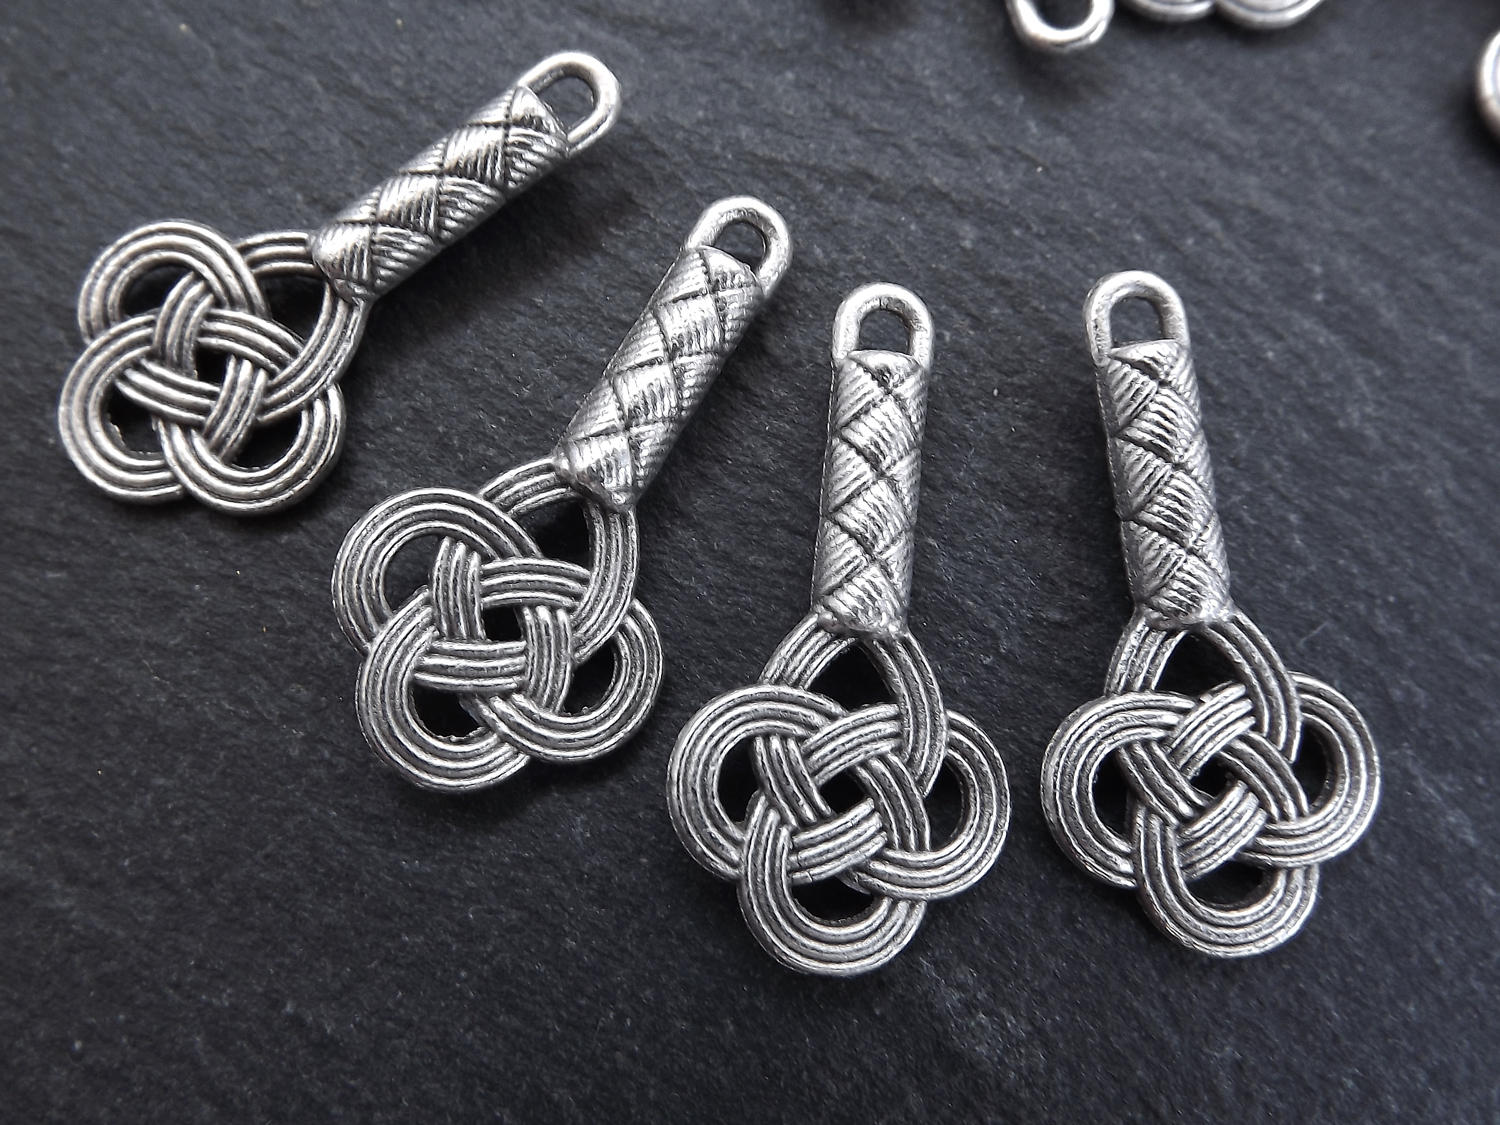 Chinese Flower Knot Charm Pendant, Silver Charms, Jewelry Making Supplies - Matte Antique Silver Plated- 4pc